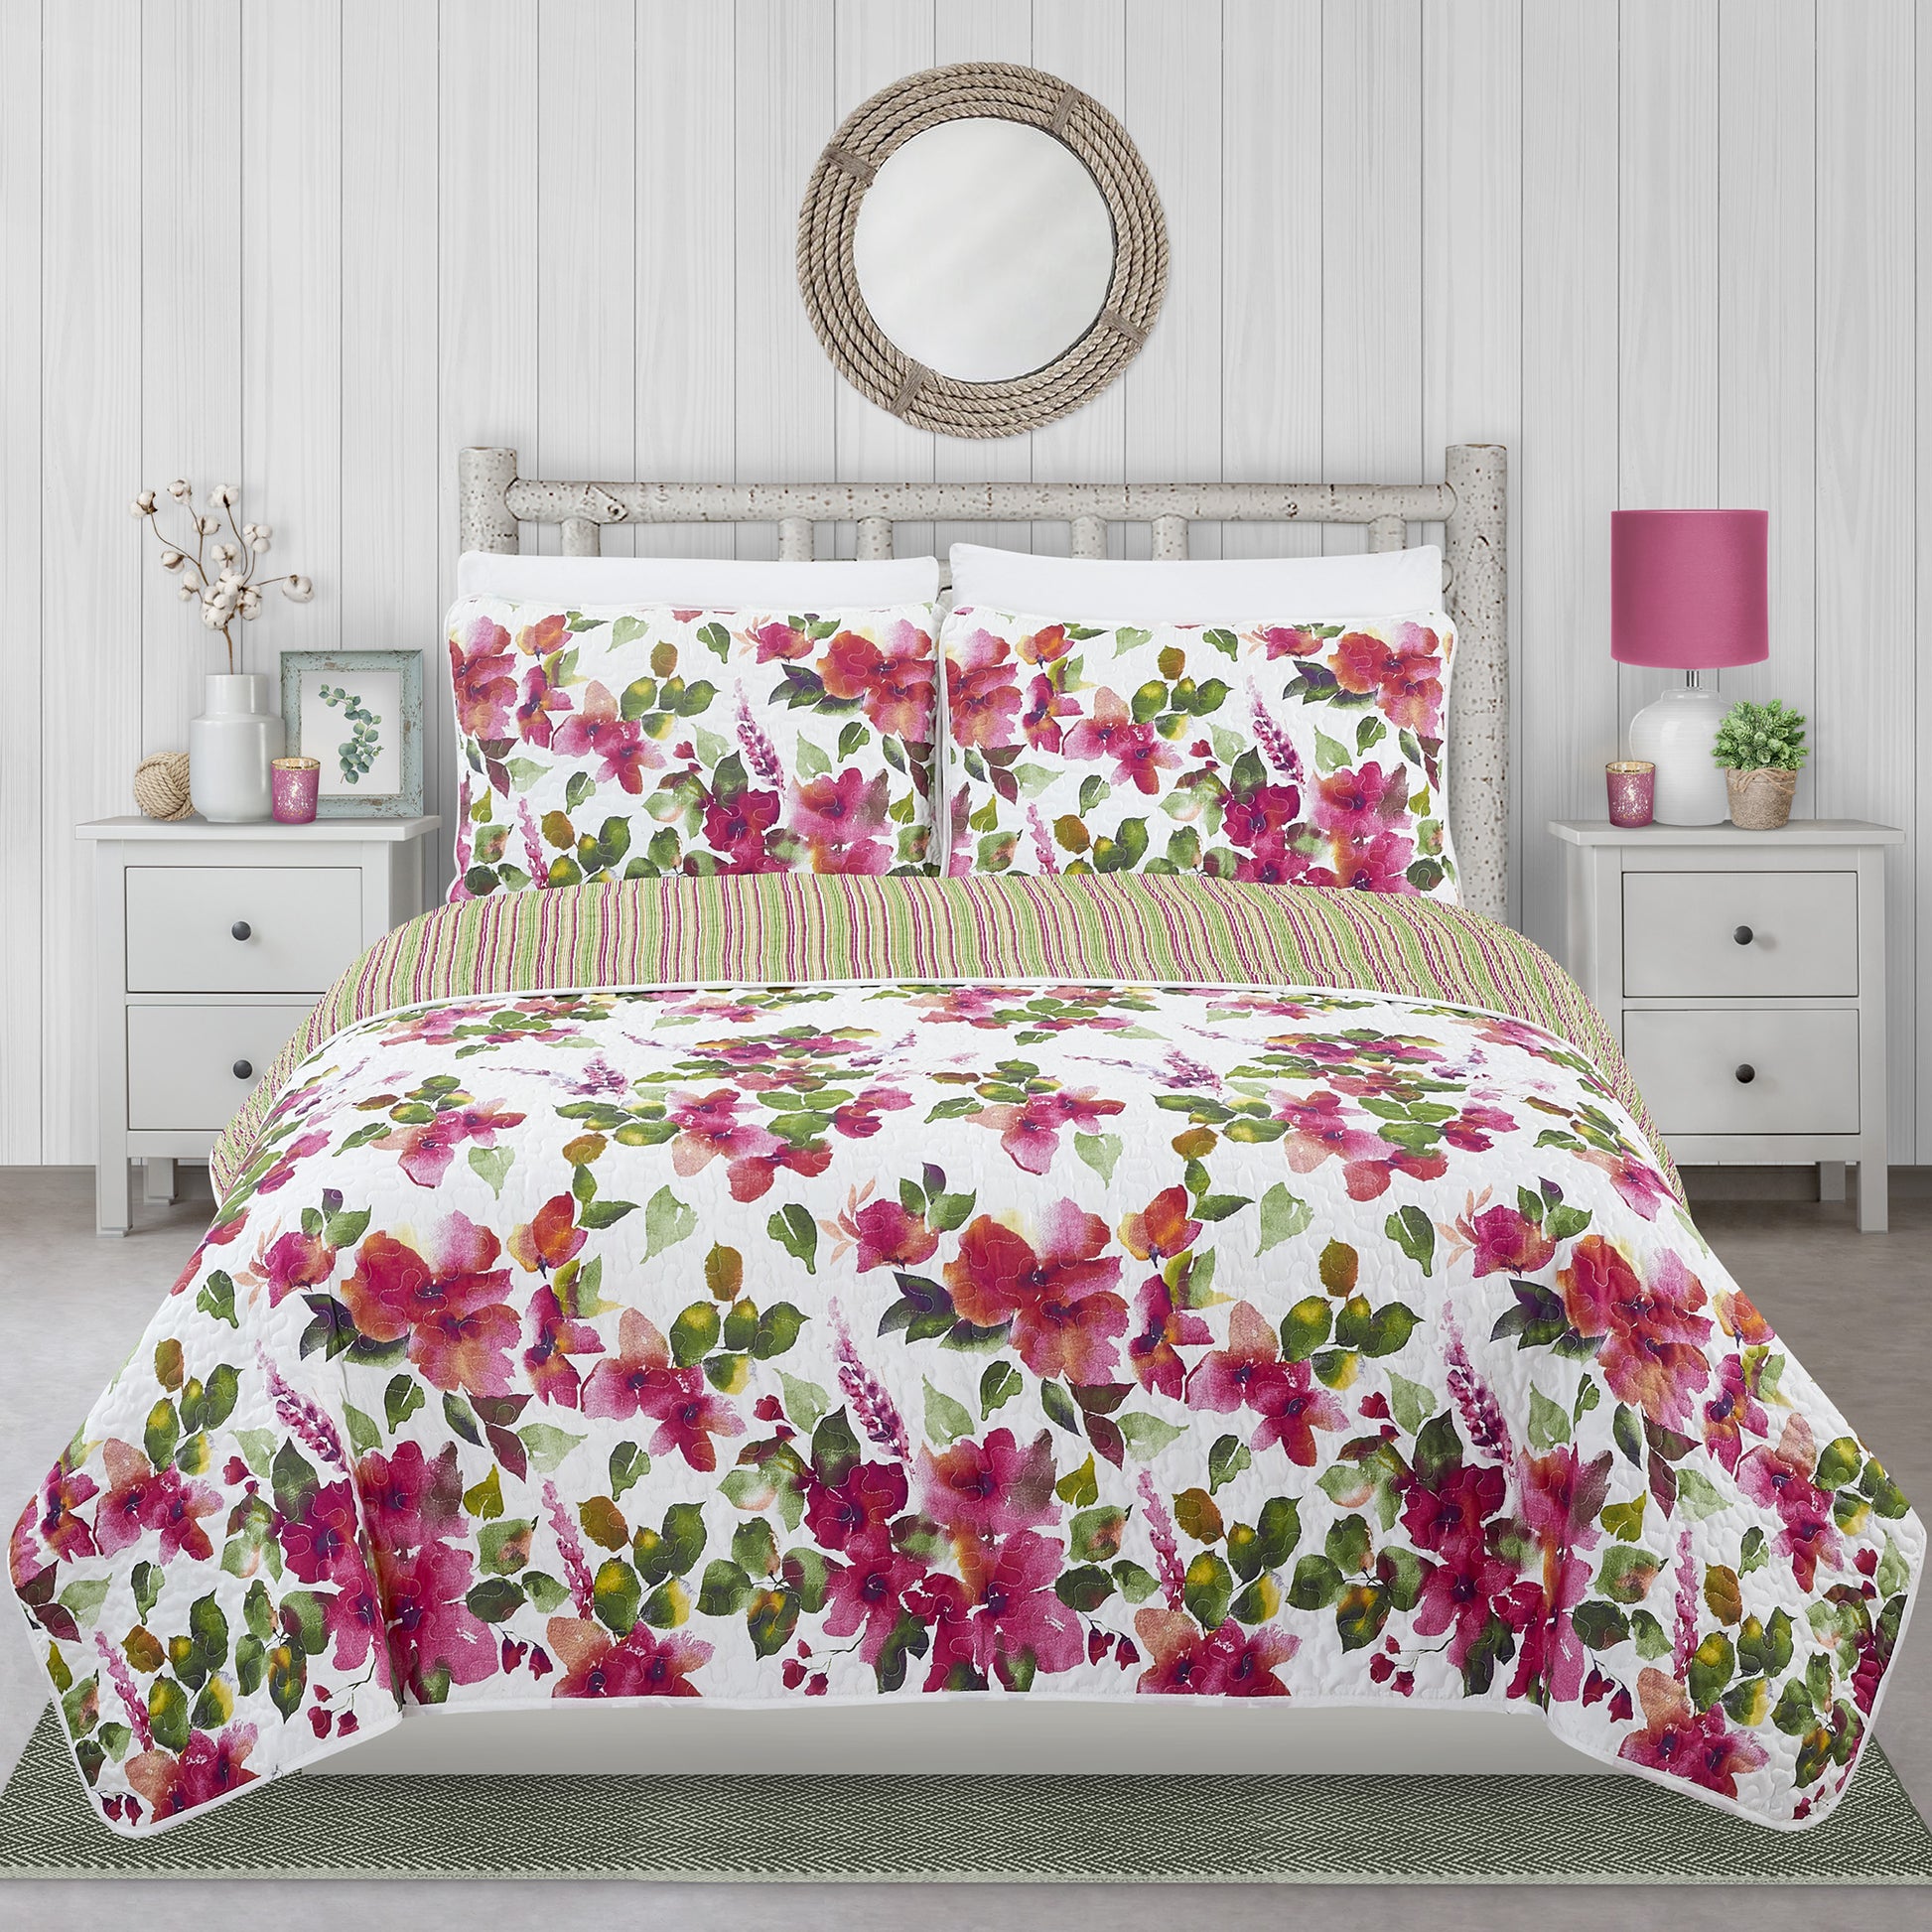 Woven Quilt 3 Piece King Floral